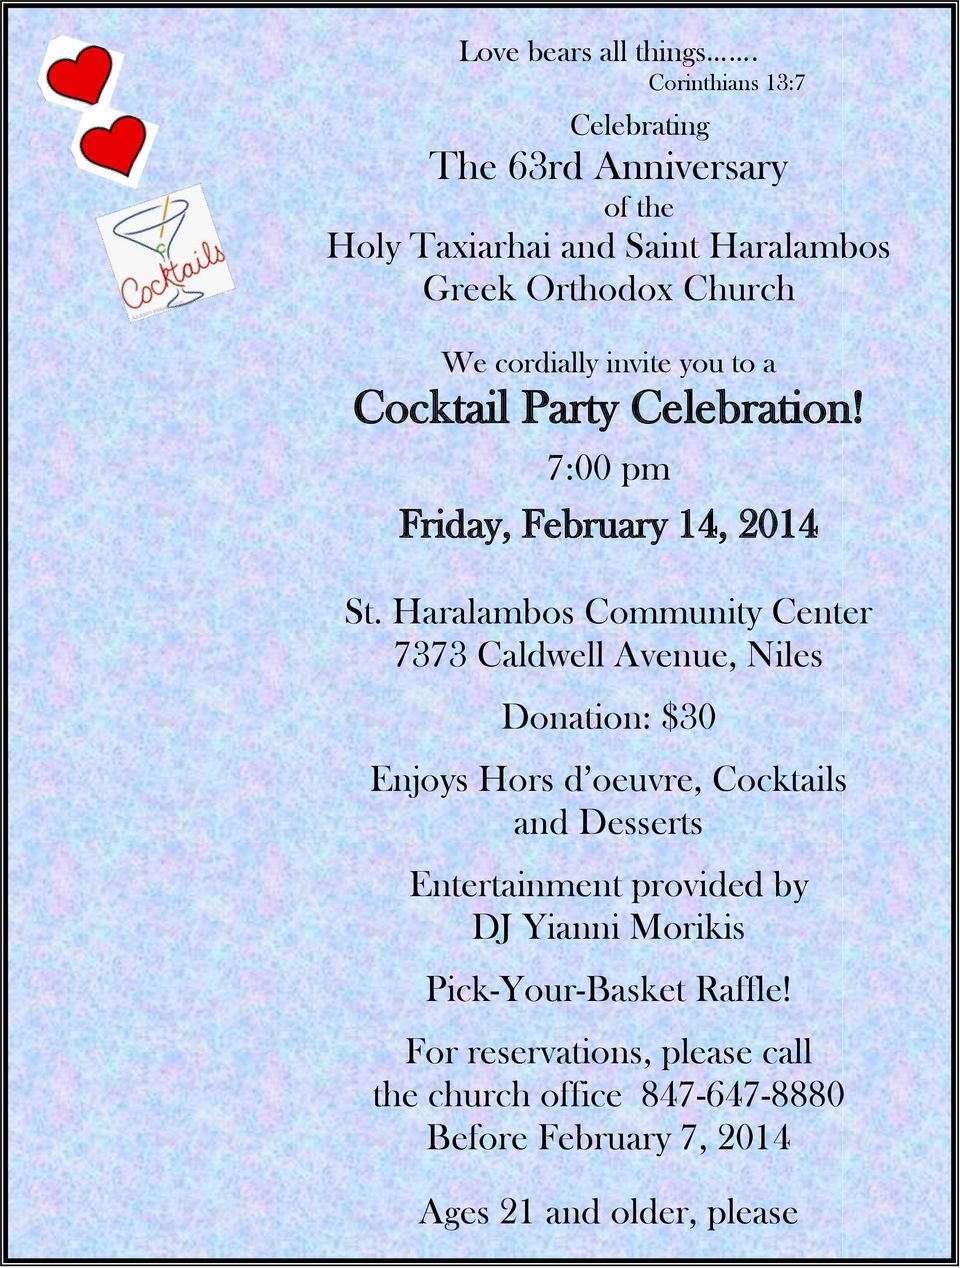 invite you to a Cocktail Party Celebration! 6 7:00 pm Friday, February 14, 2014 St.